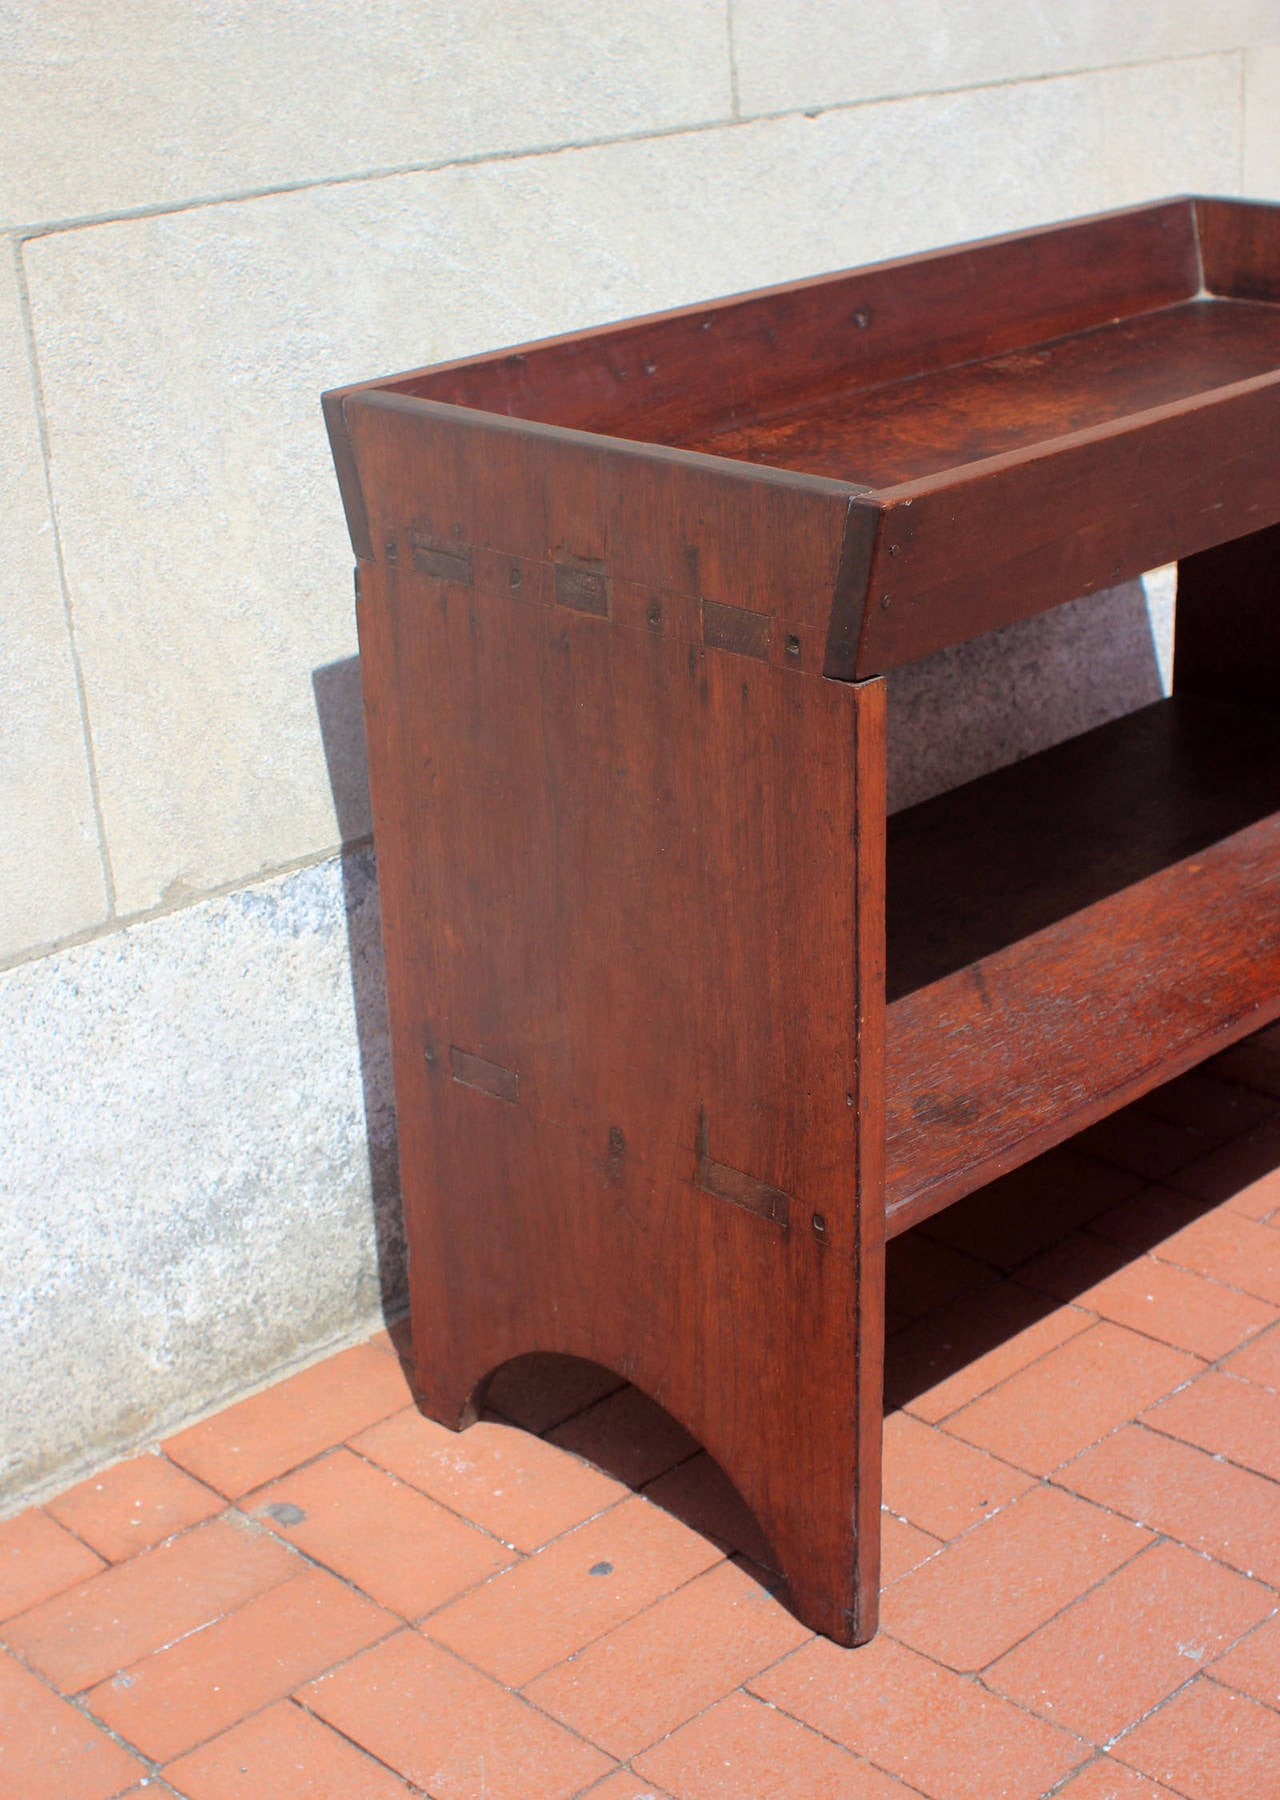 Country Bucket Bench with Canted Top, Walnut, American, circa 1850